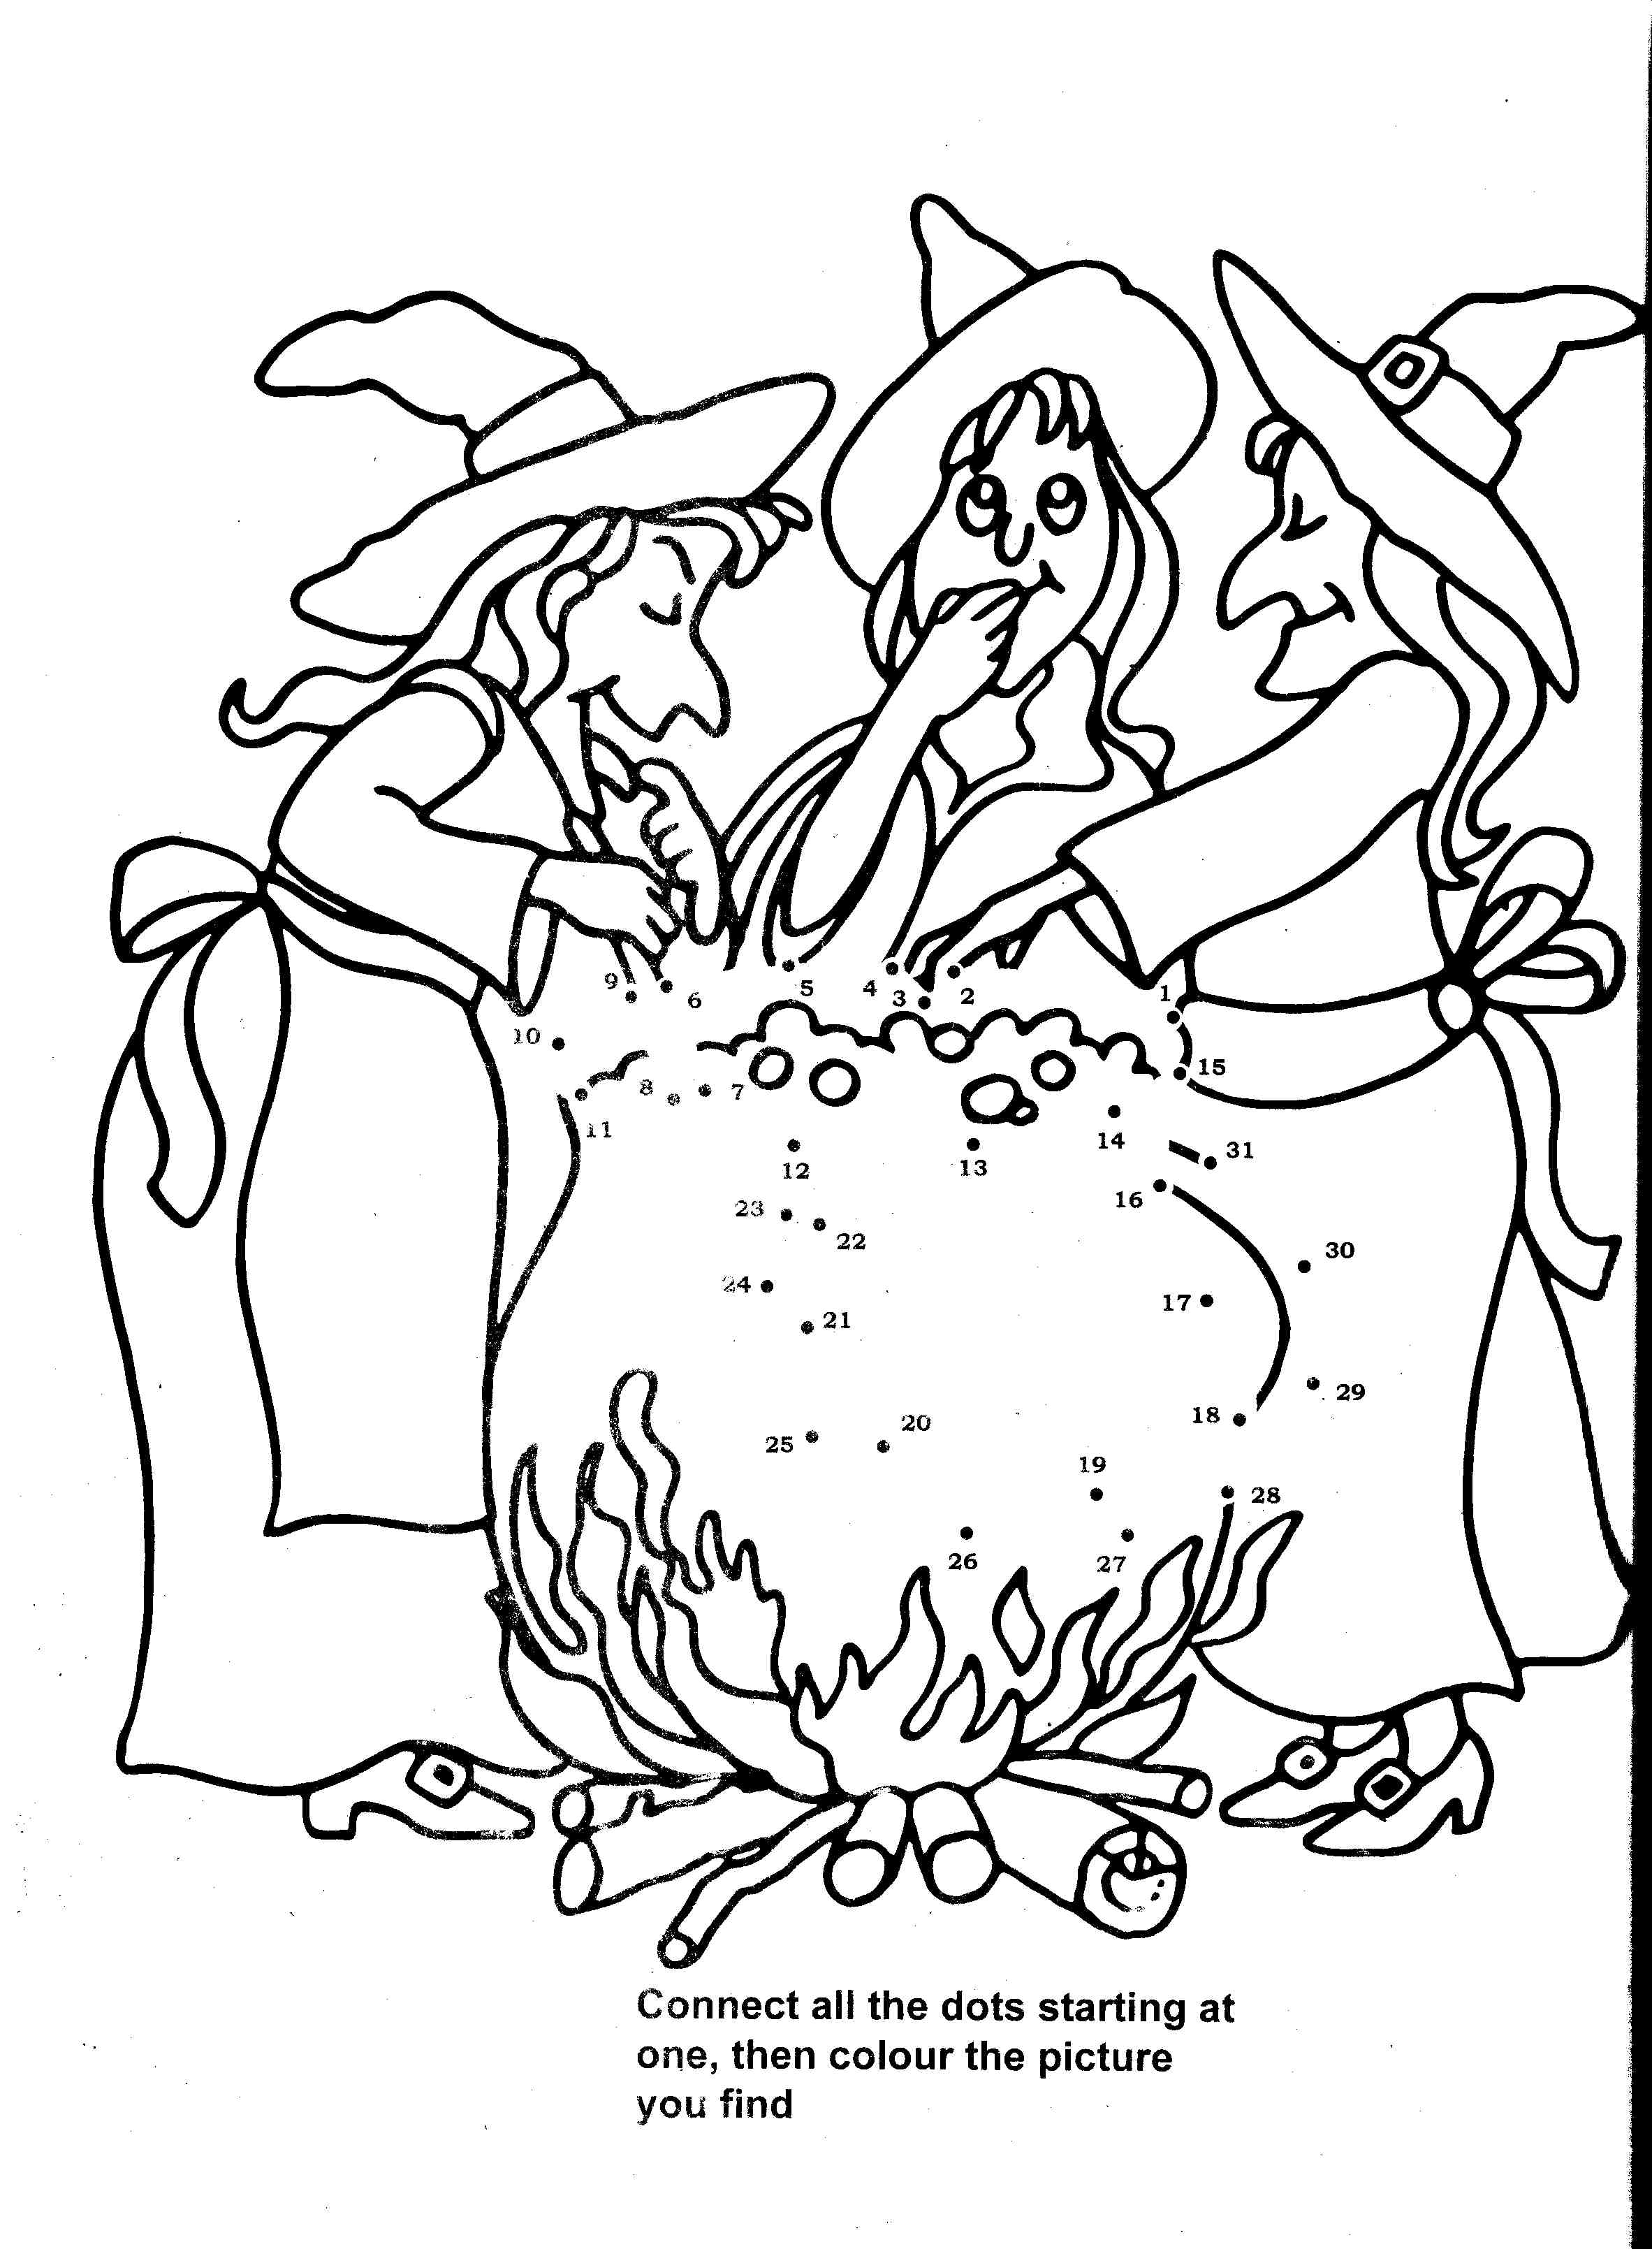  Halloween coloring pages | 3 Witch